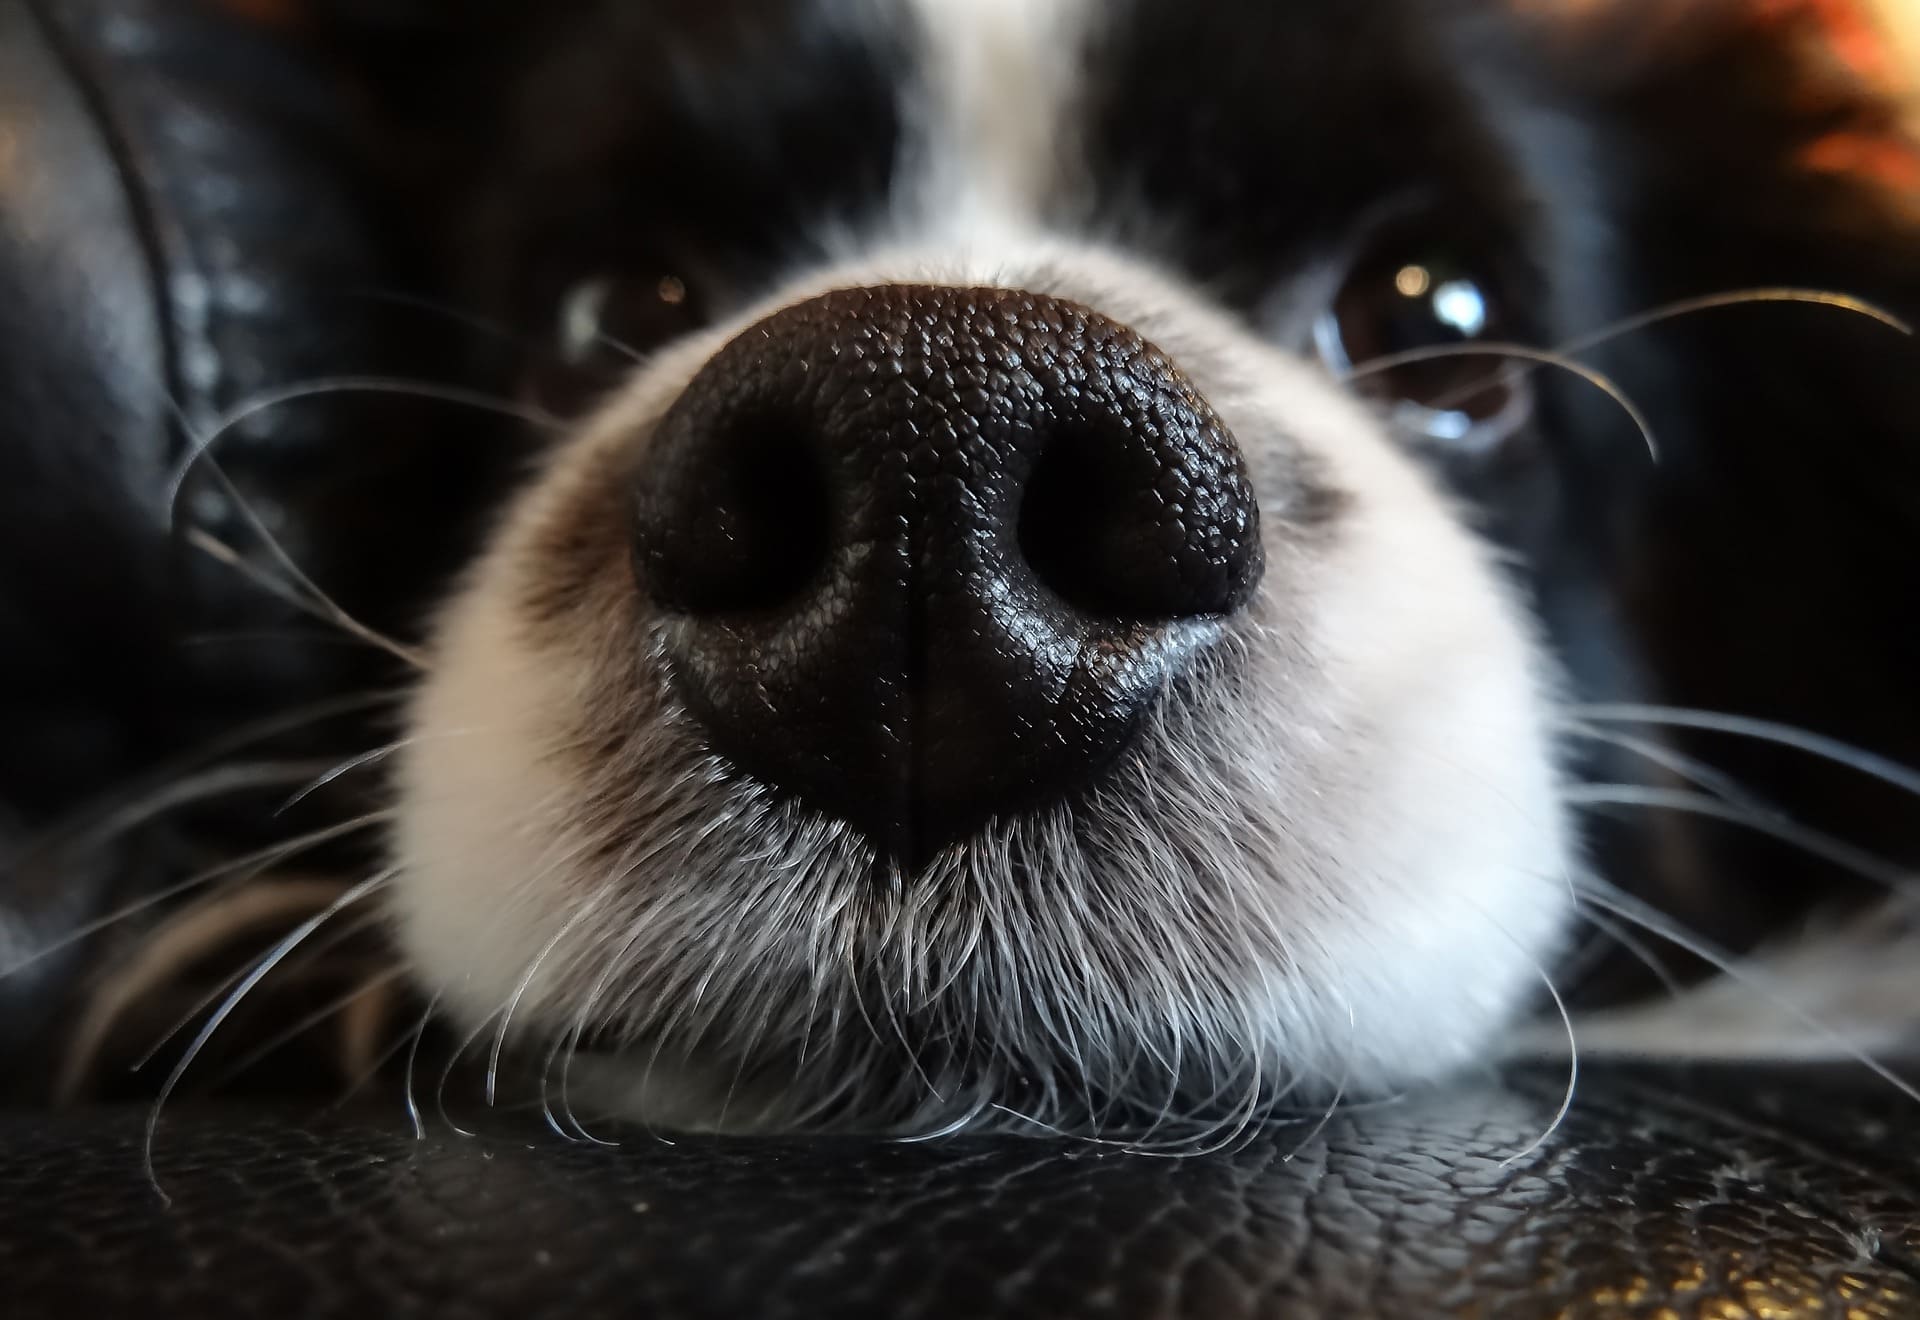 Why Do Dogs Have Wet Noses? - Sweetie